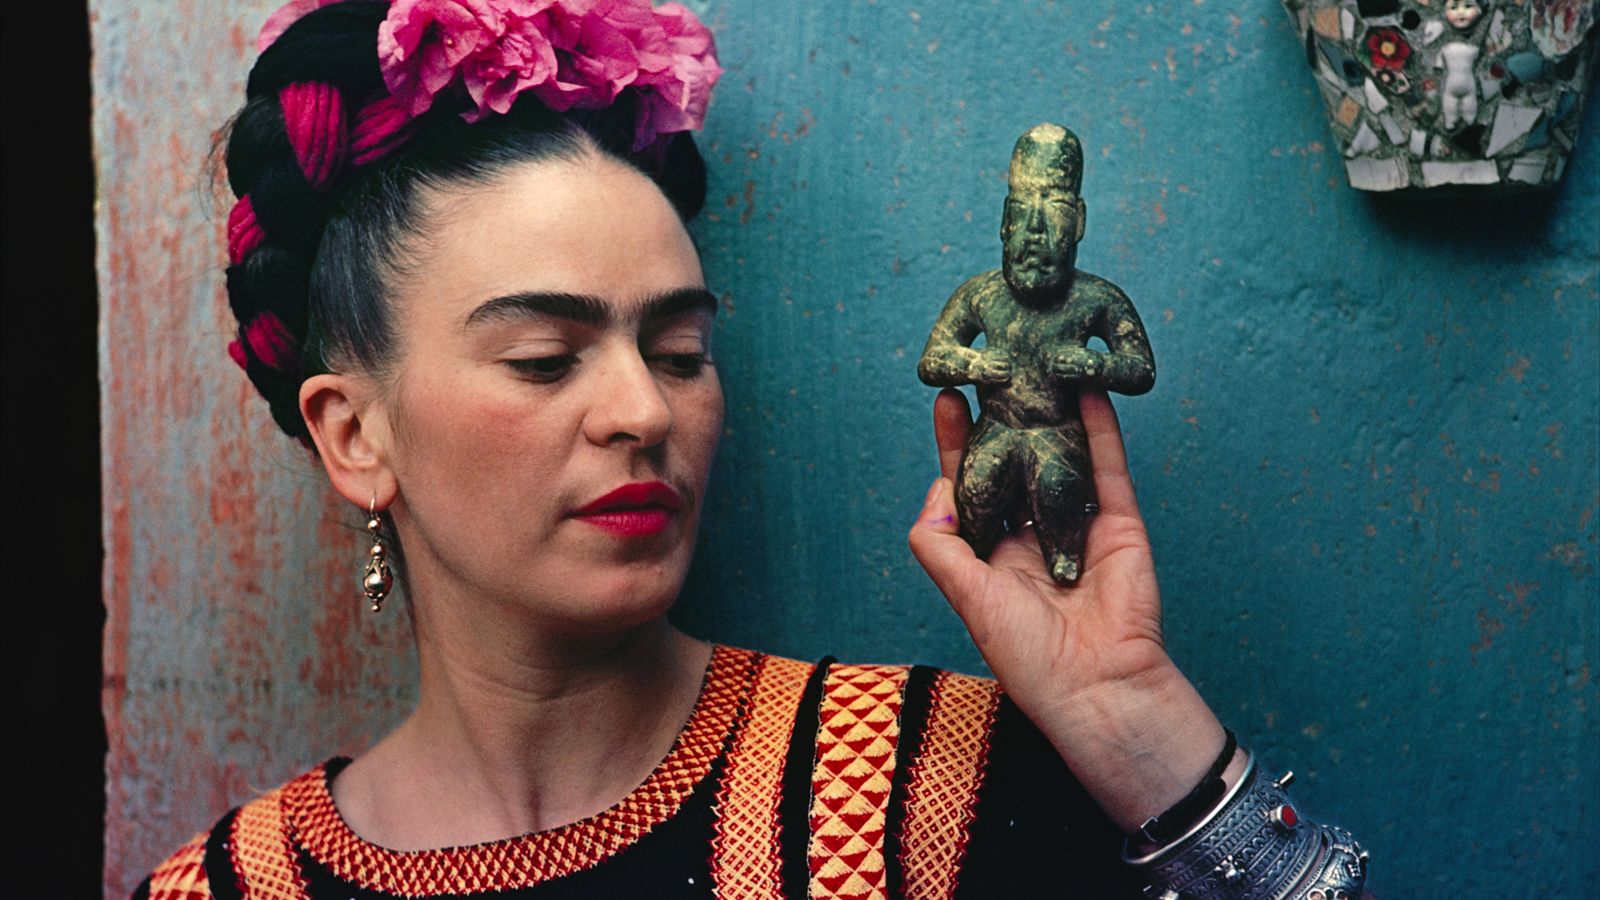 In honor of Frida Kahlo's birthday, here are 5 things you should